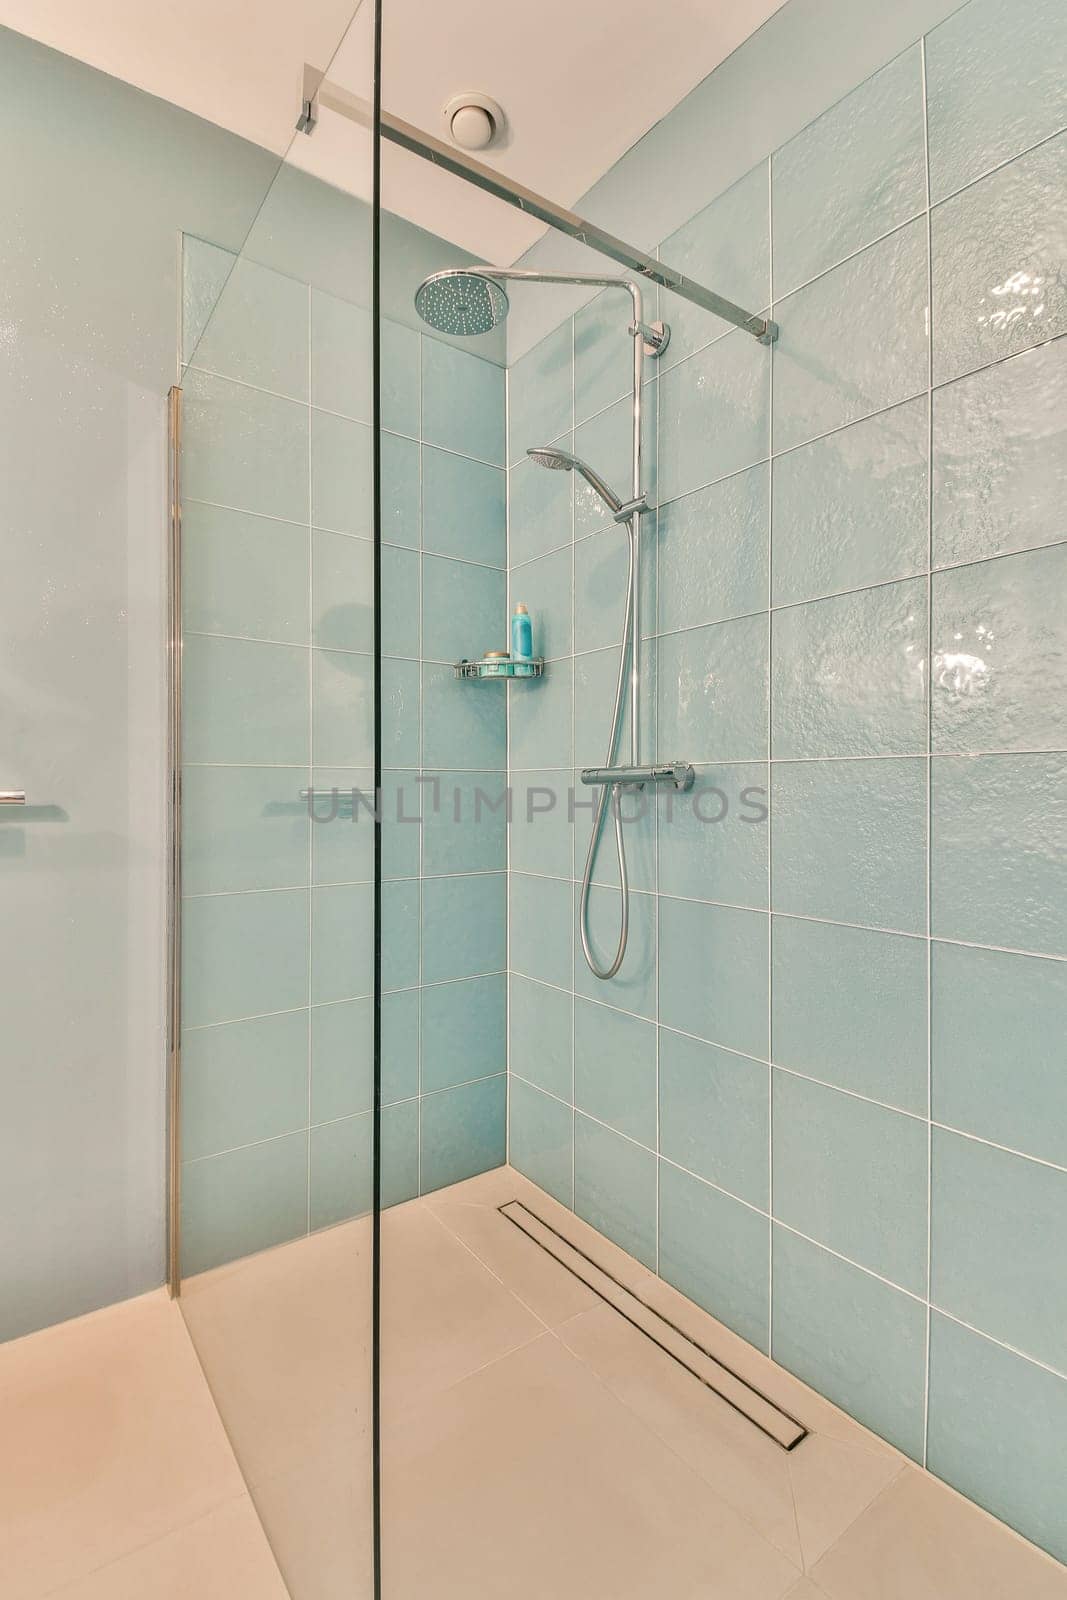 a bathroom with blue tiles on the wall and shower head mounted to the wall in front of the glass door